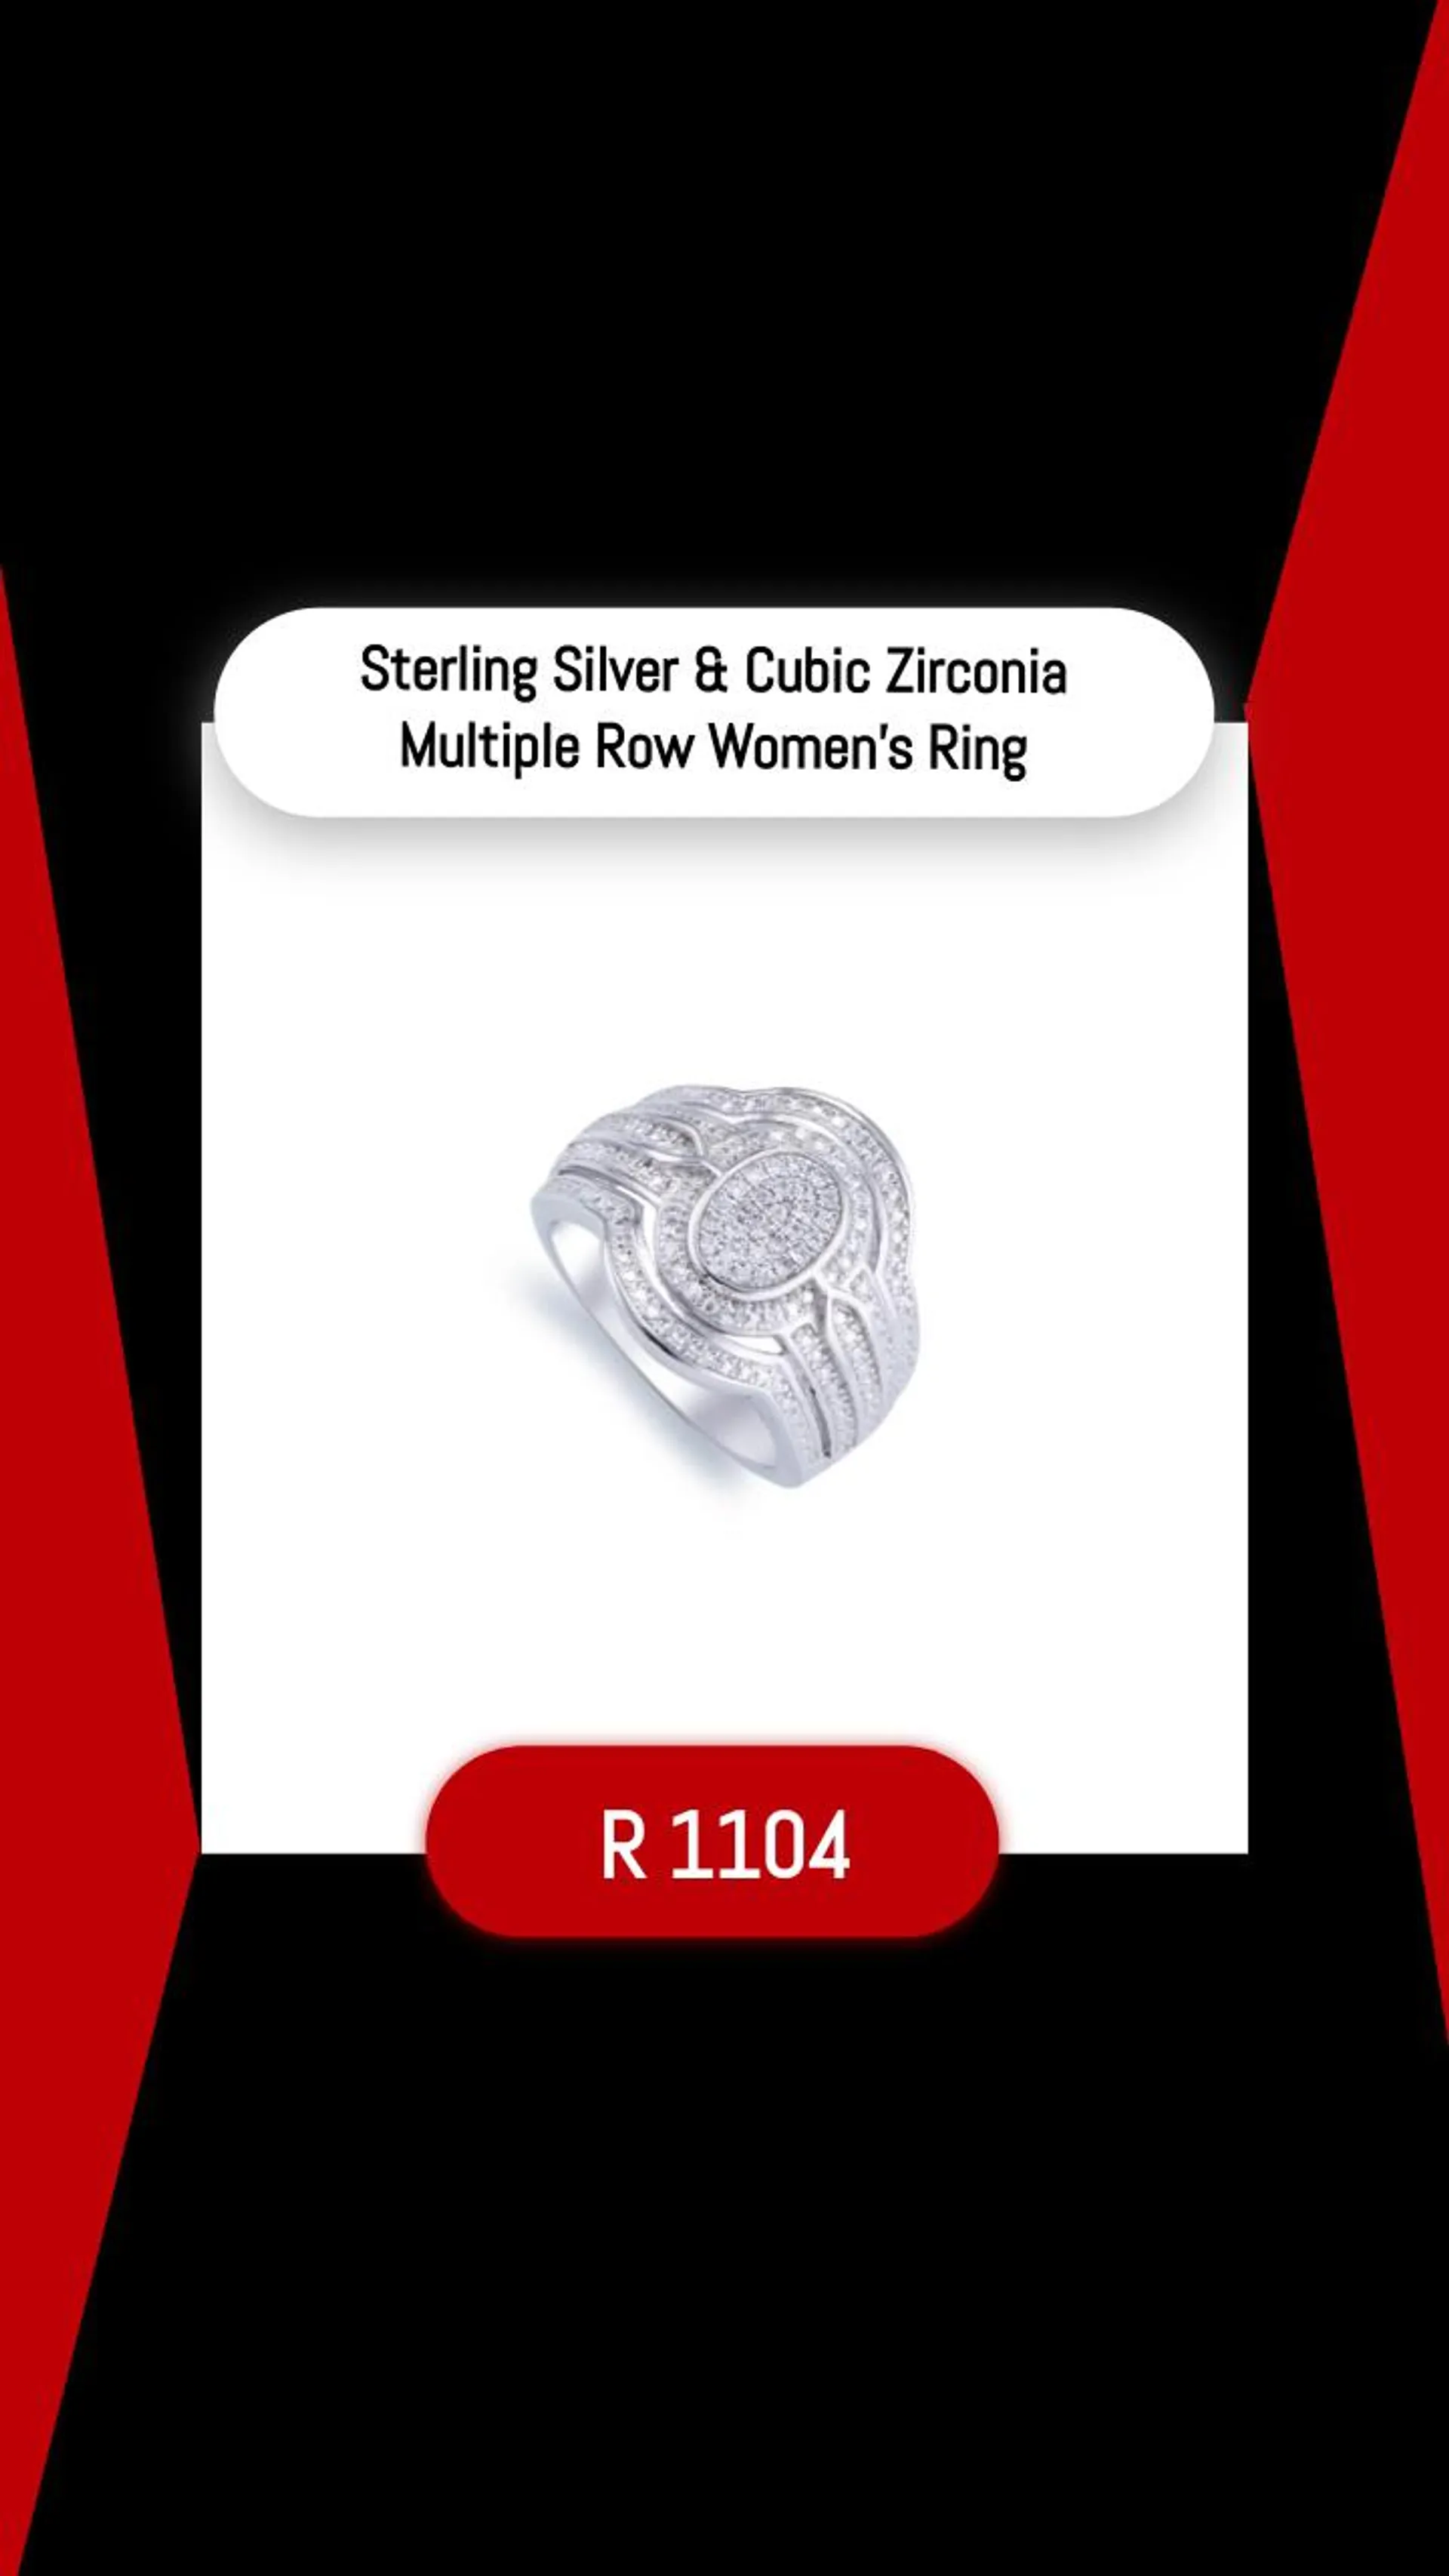 Sterling Silver & Cubic Zirconia Multiple Row Womens Ring